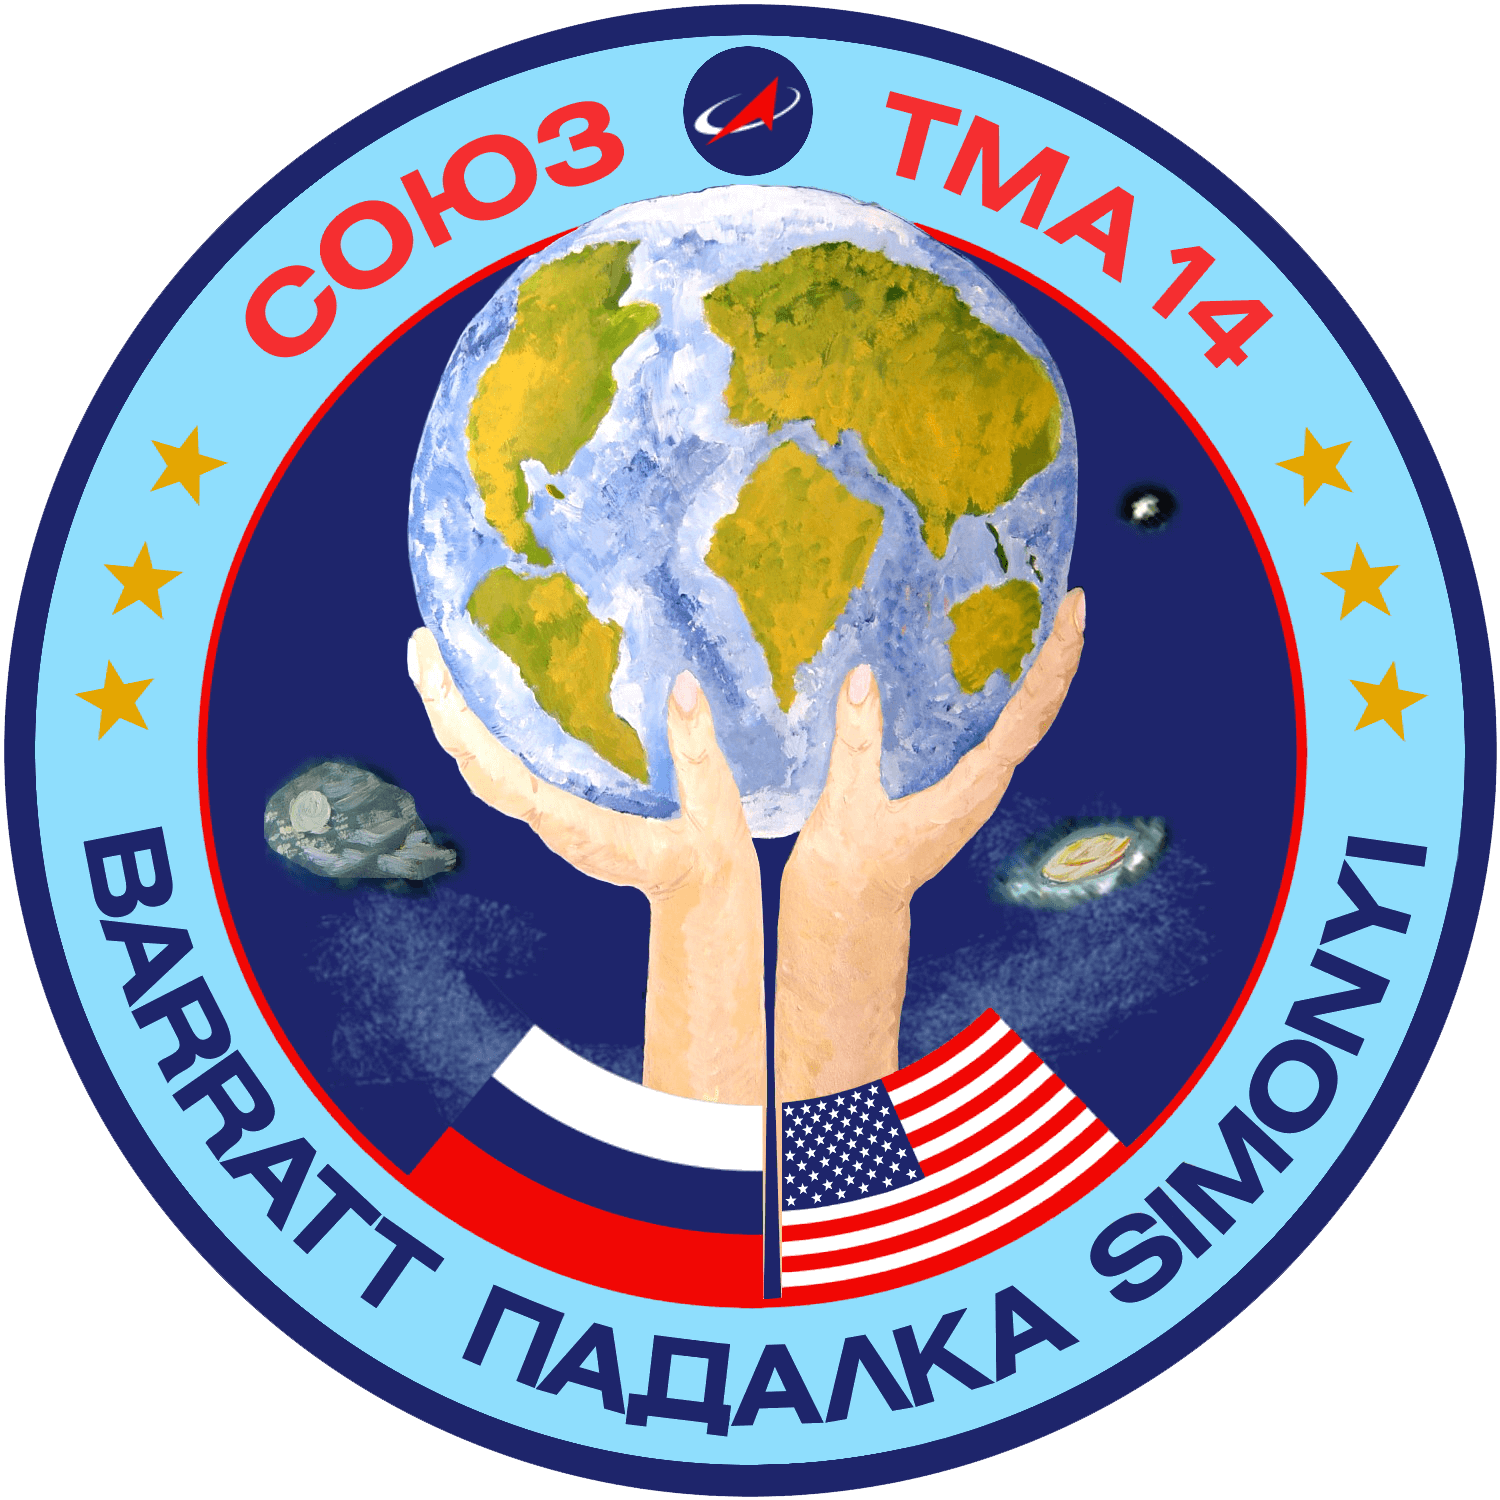 Mission patch for Soyuz TMA-14